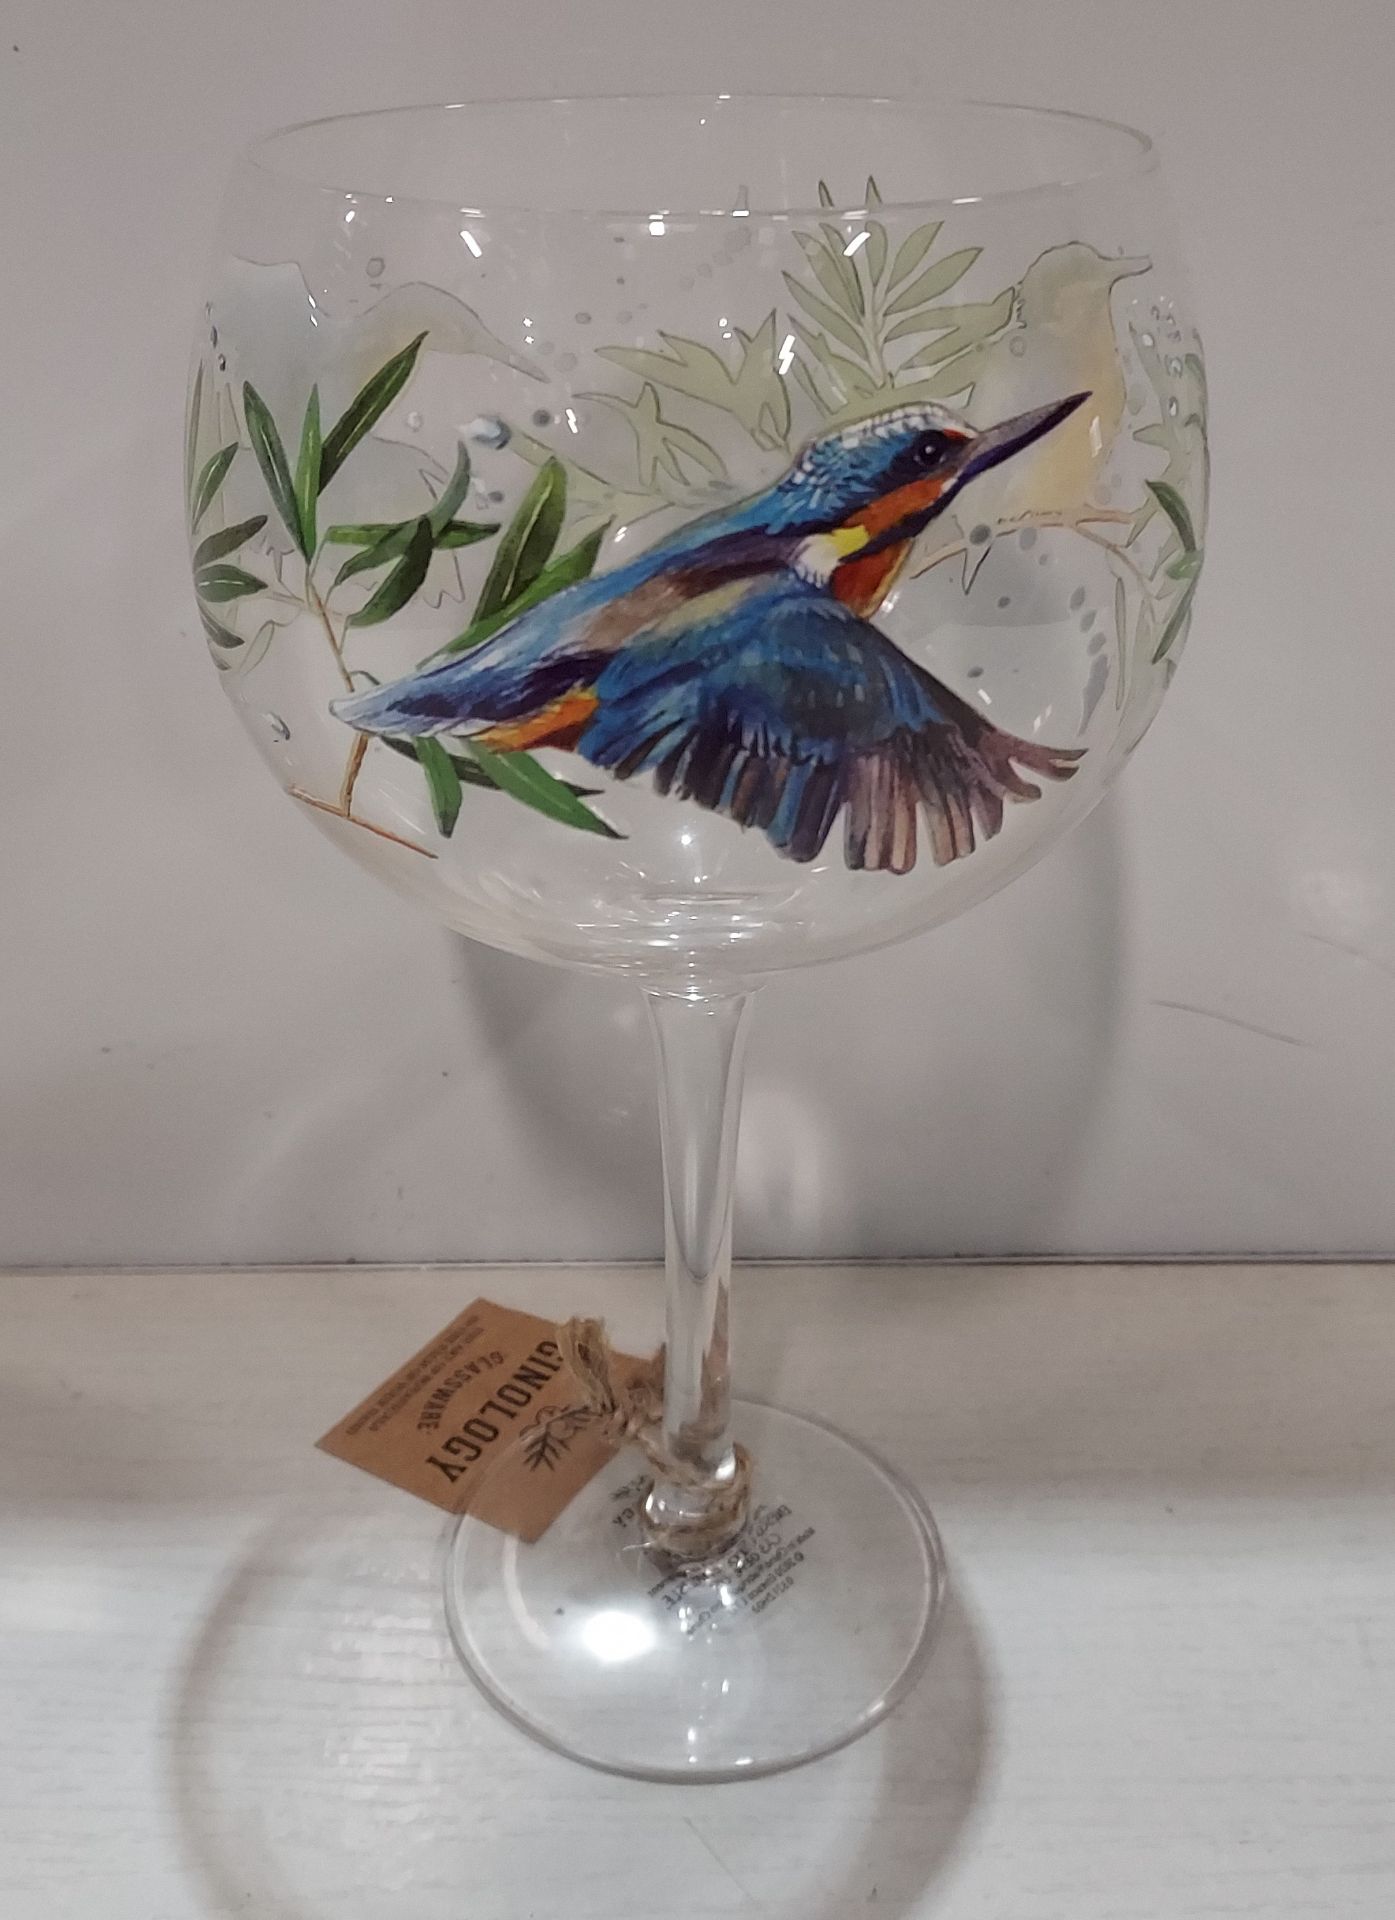 48 X BRAND NEW KINGFISHER COPA GIN GLASSES WITH BIRD AND TWIGS DESIGN - IN 4 BOXES